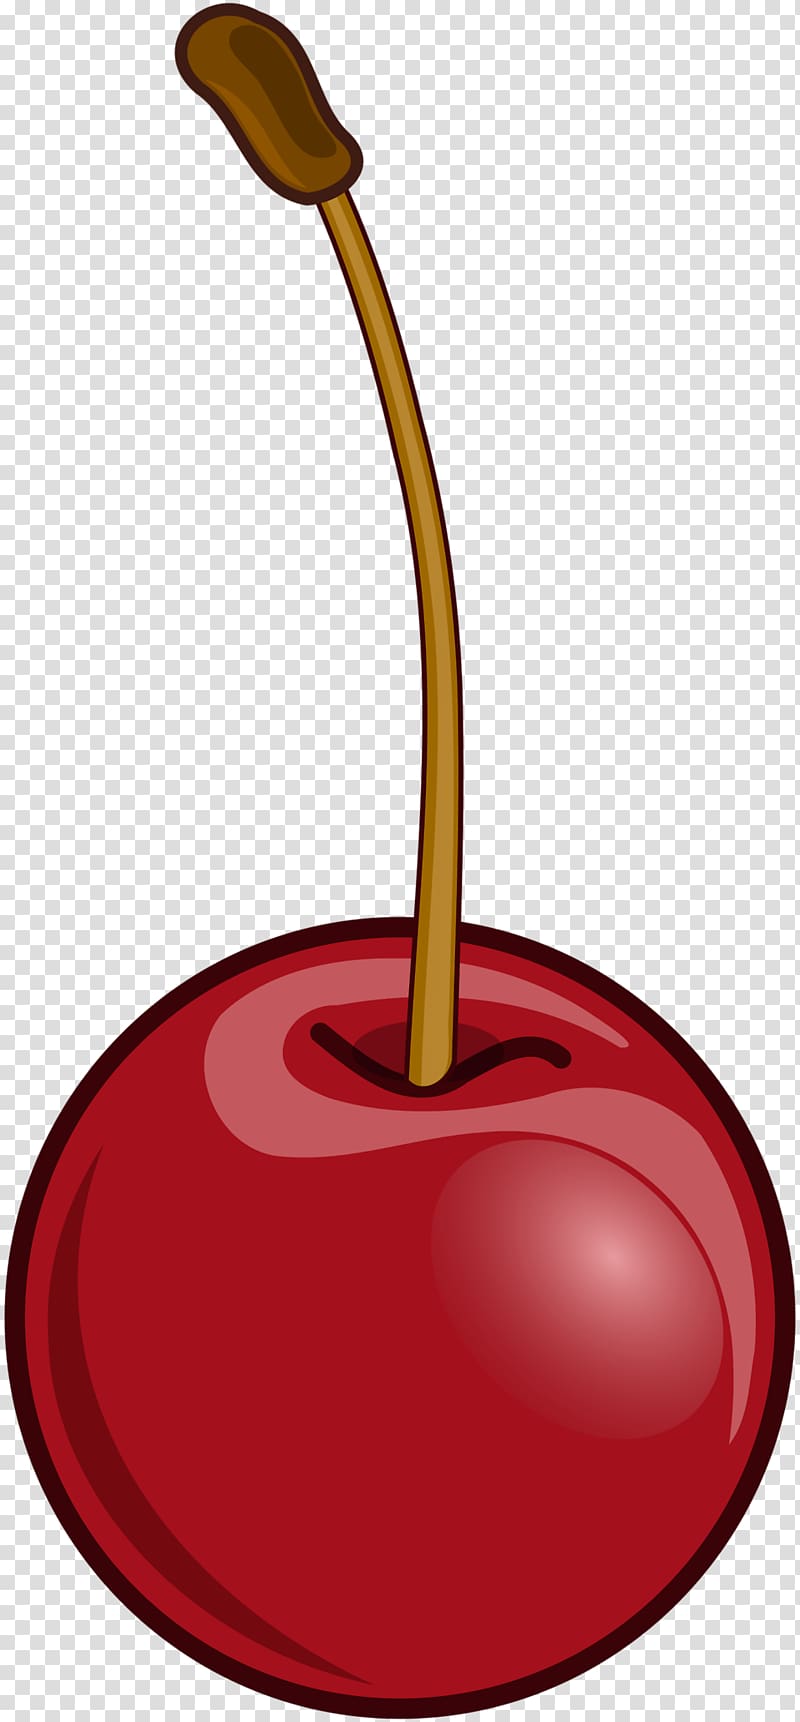 Cherry pie Fruit Berry , cherry transparent background PNG clipart